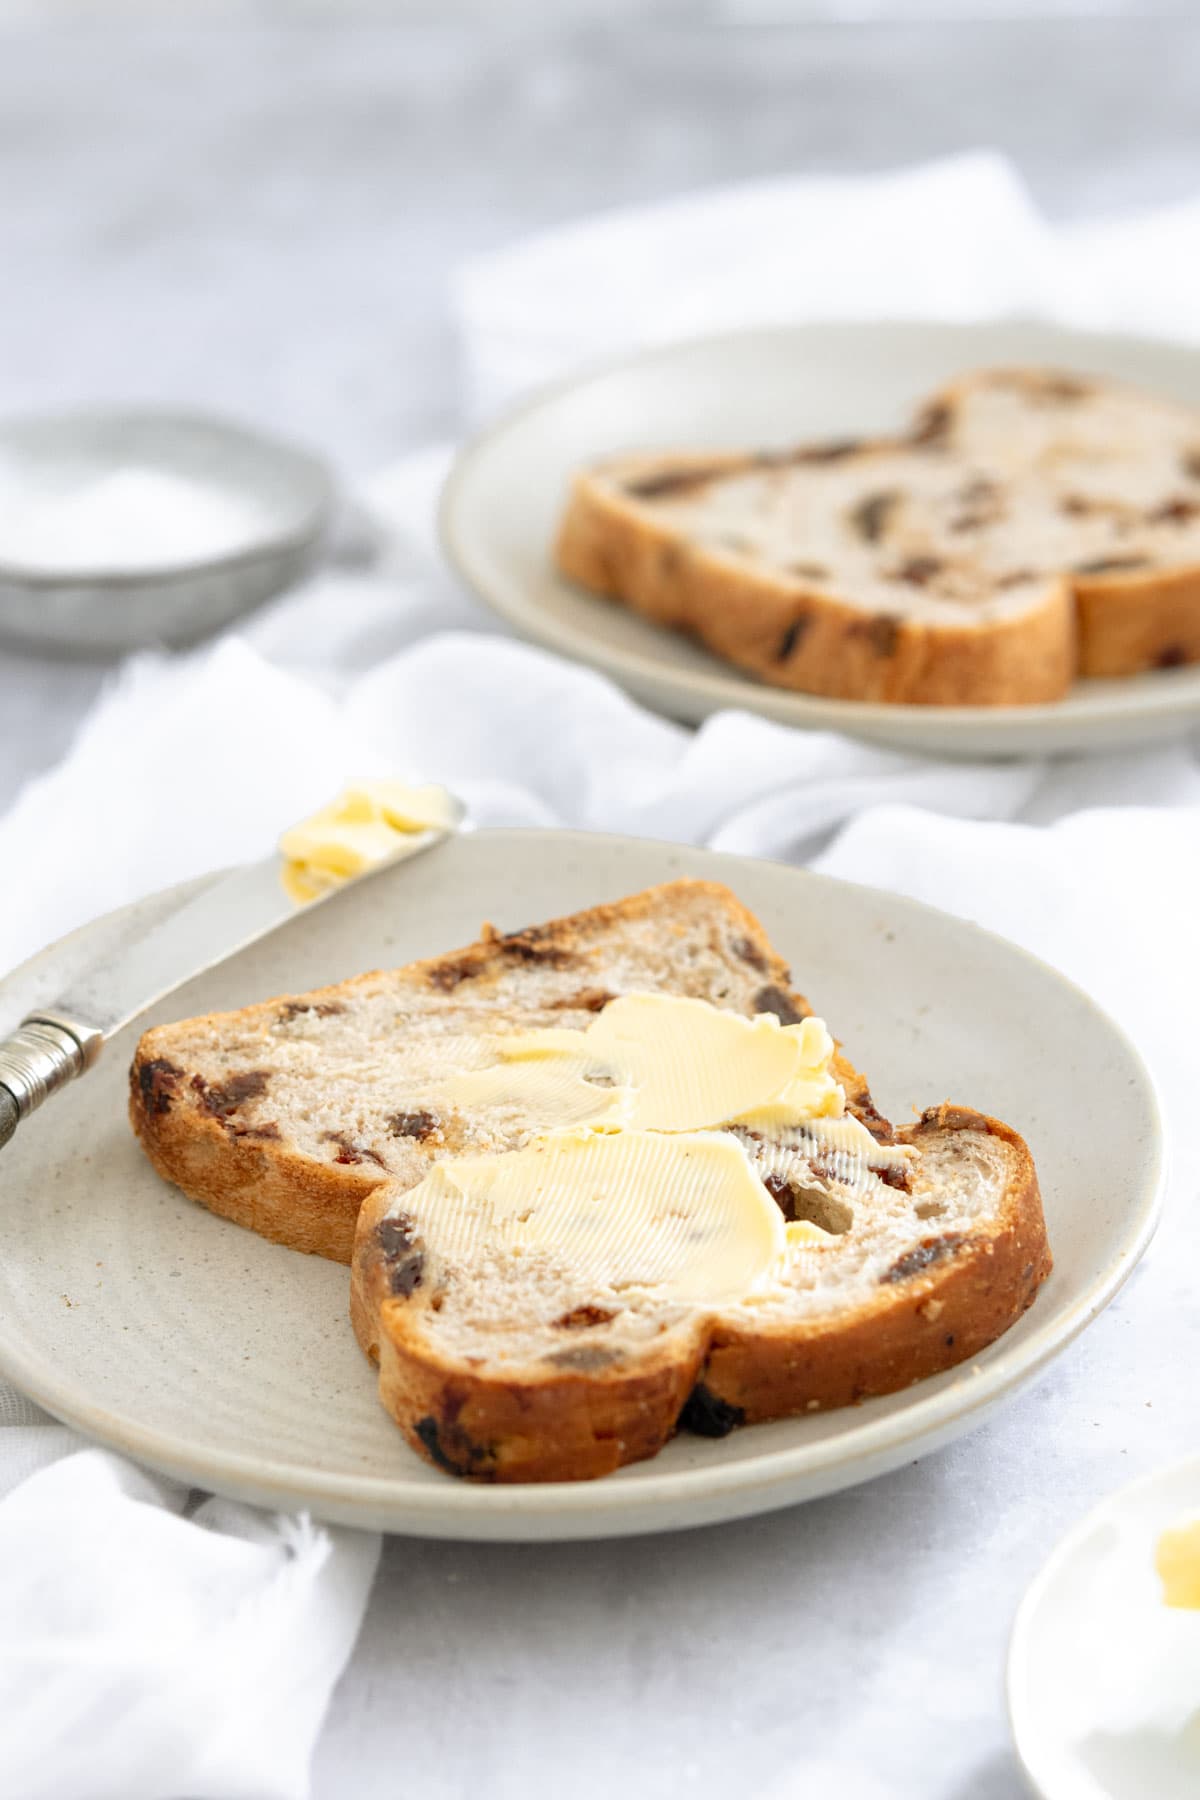 A slice of fruit loaf on a plate spread with unsalted butter